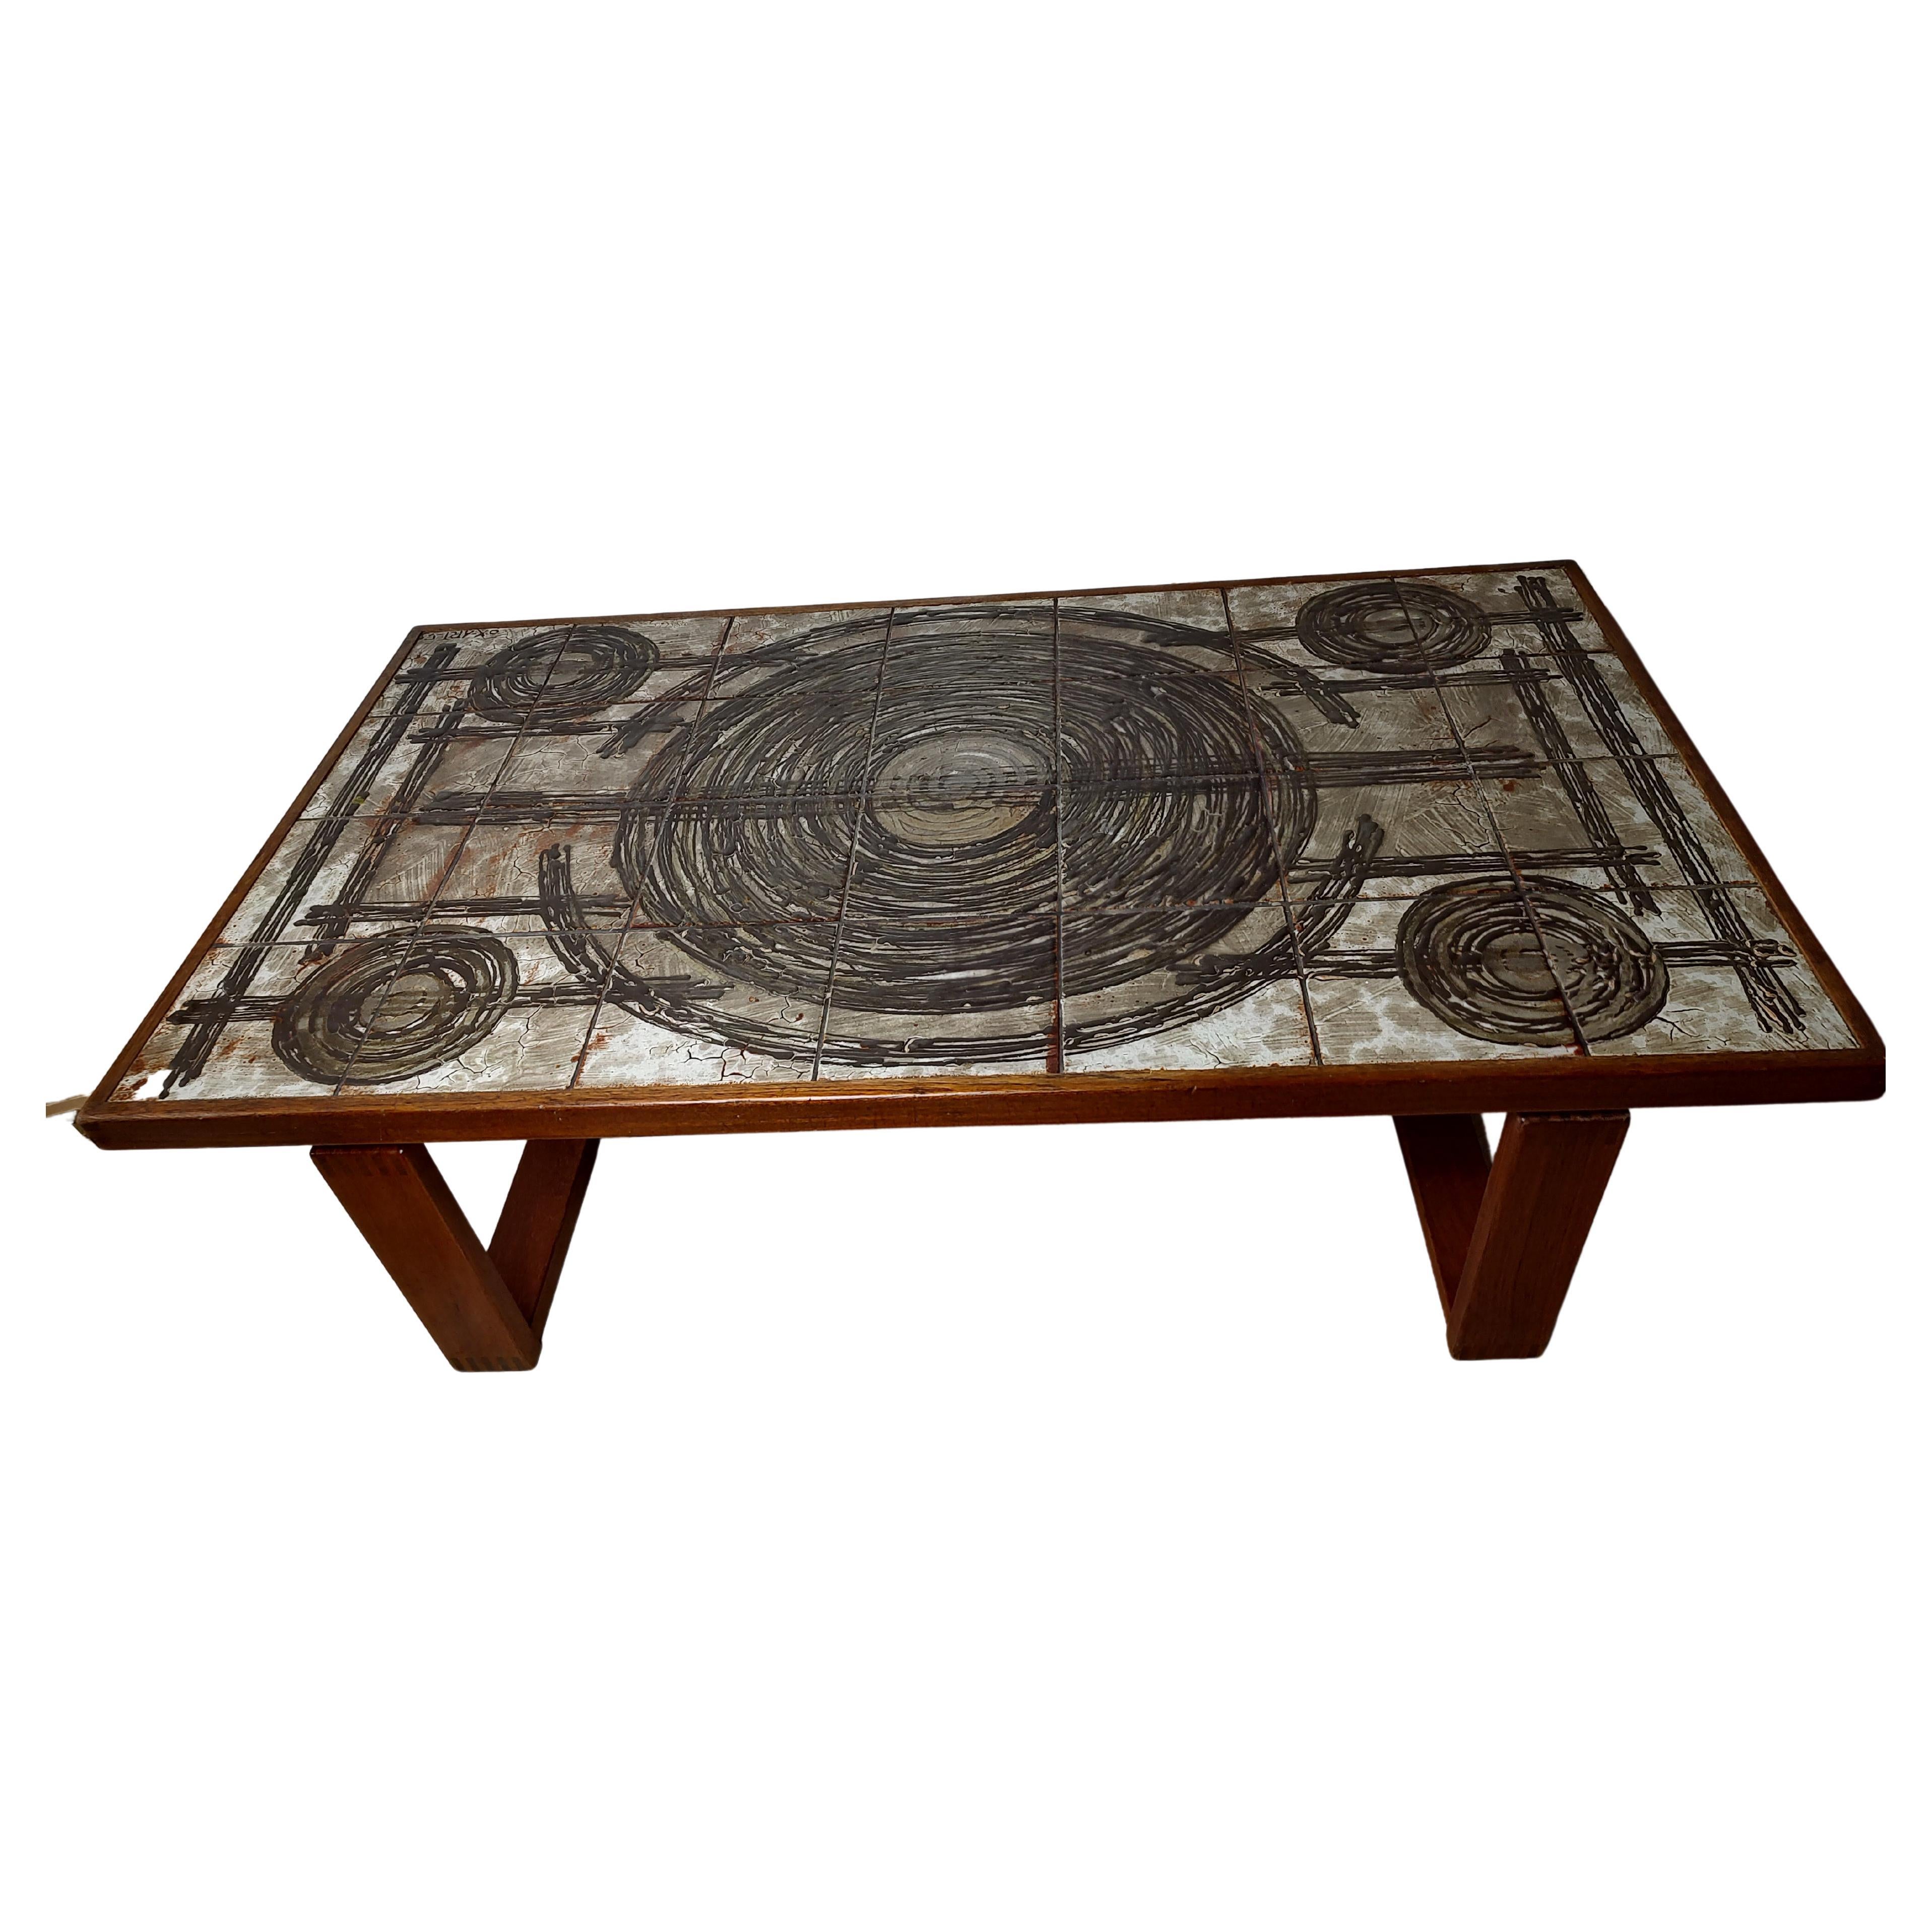 Danish Mid-Century Modern Sculptural Tile Top Cocktail Table by Ox-Art For Sale